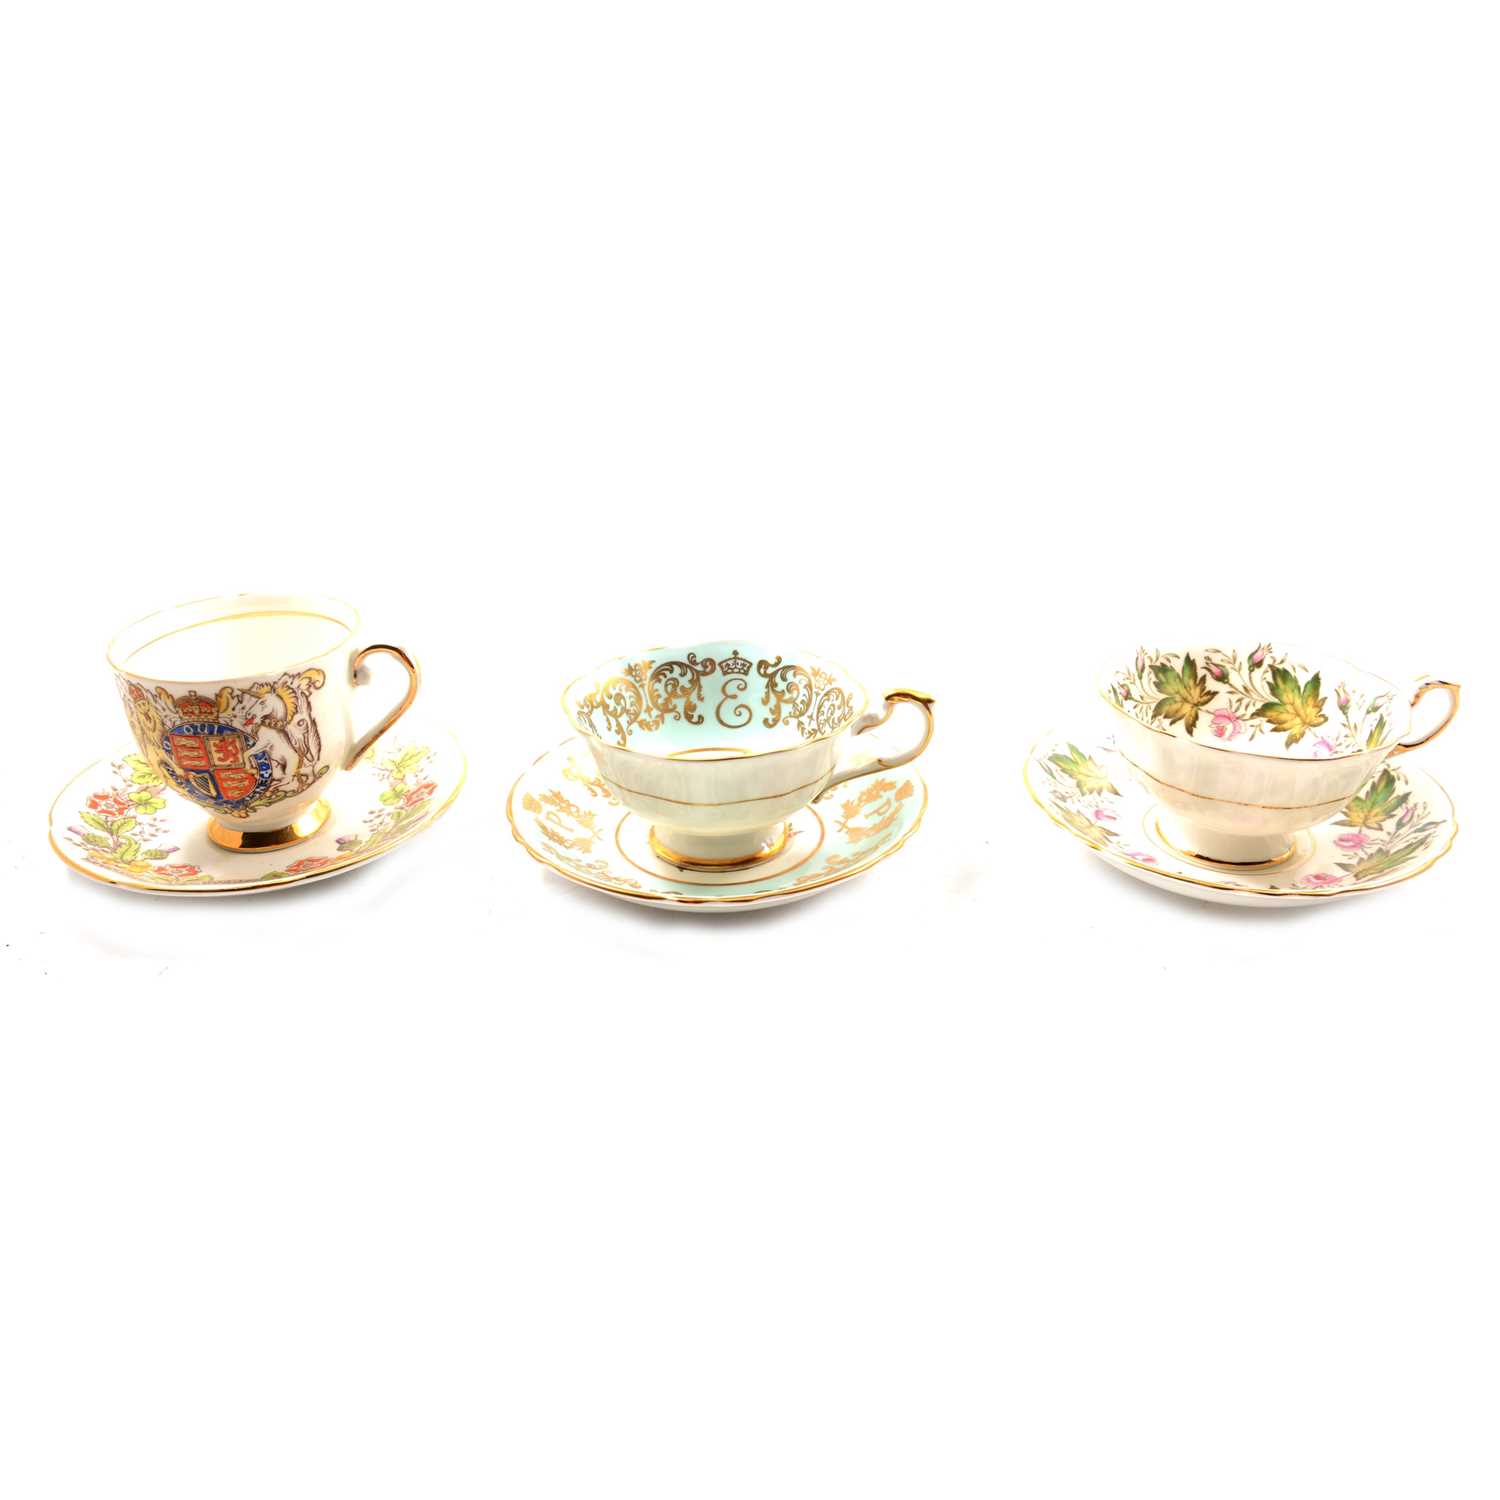 Collection of Royal commemorative Paragon teacups and saucers